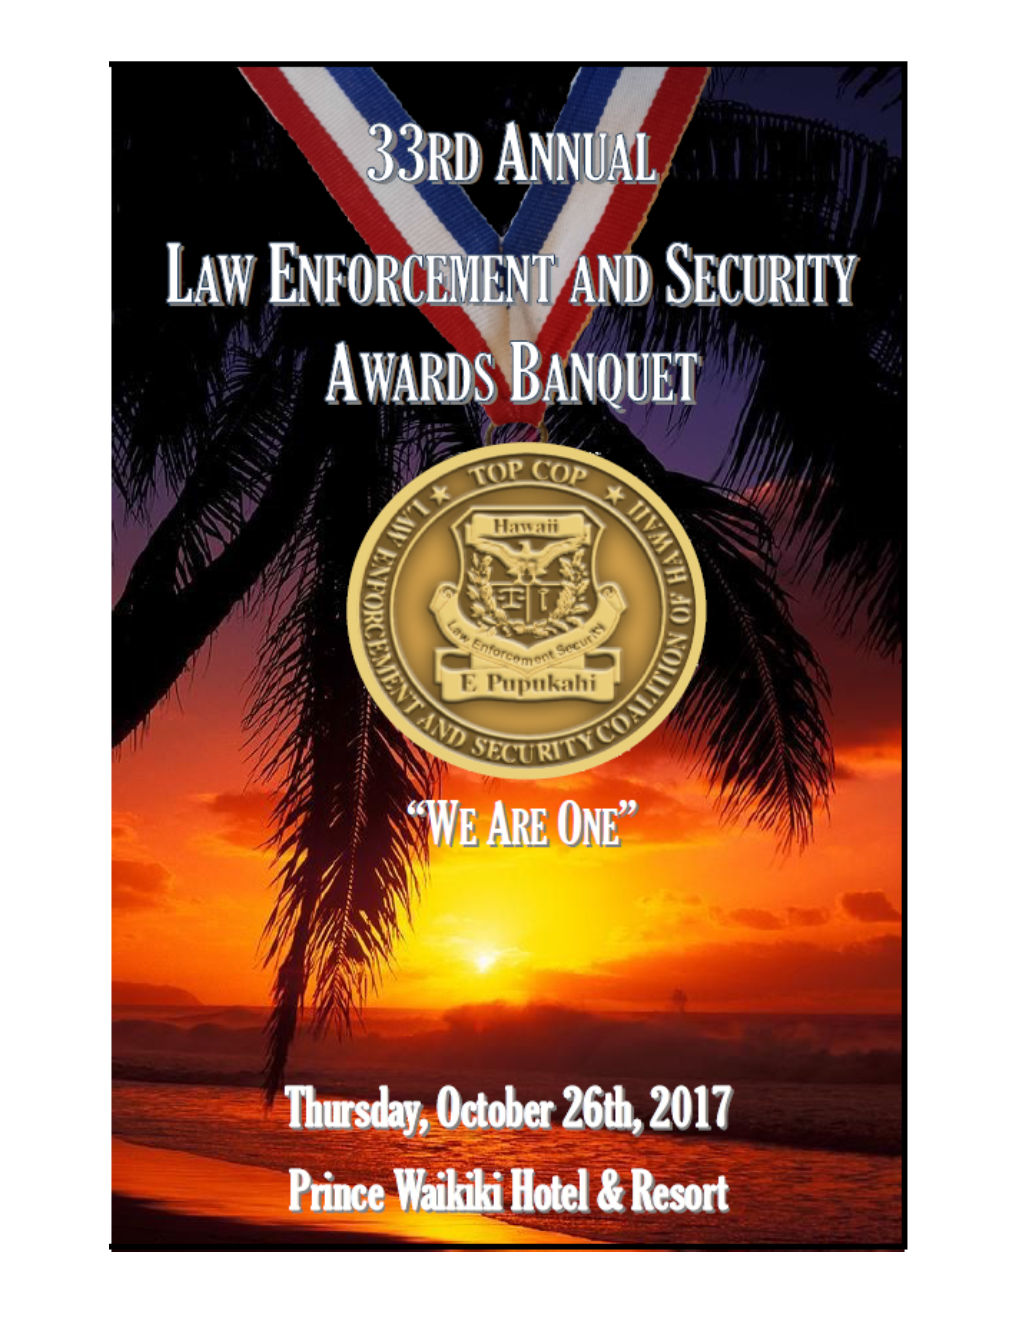 2017 Law Enforcement and Security Awards Banquet